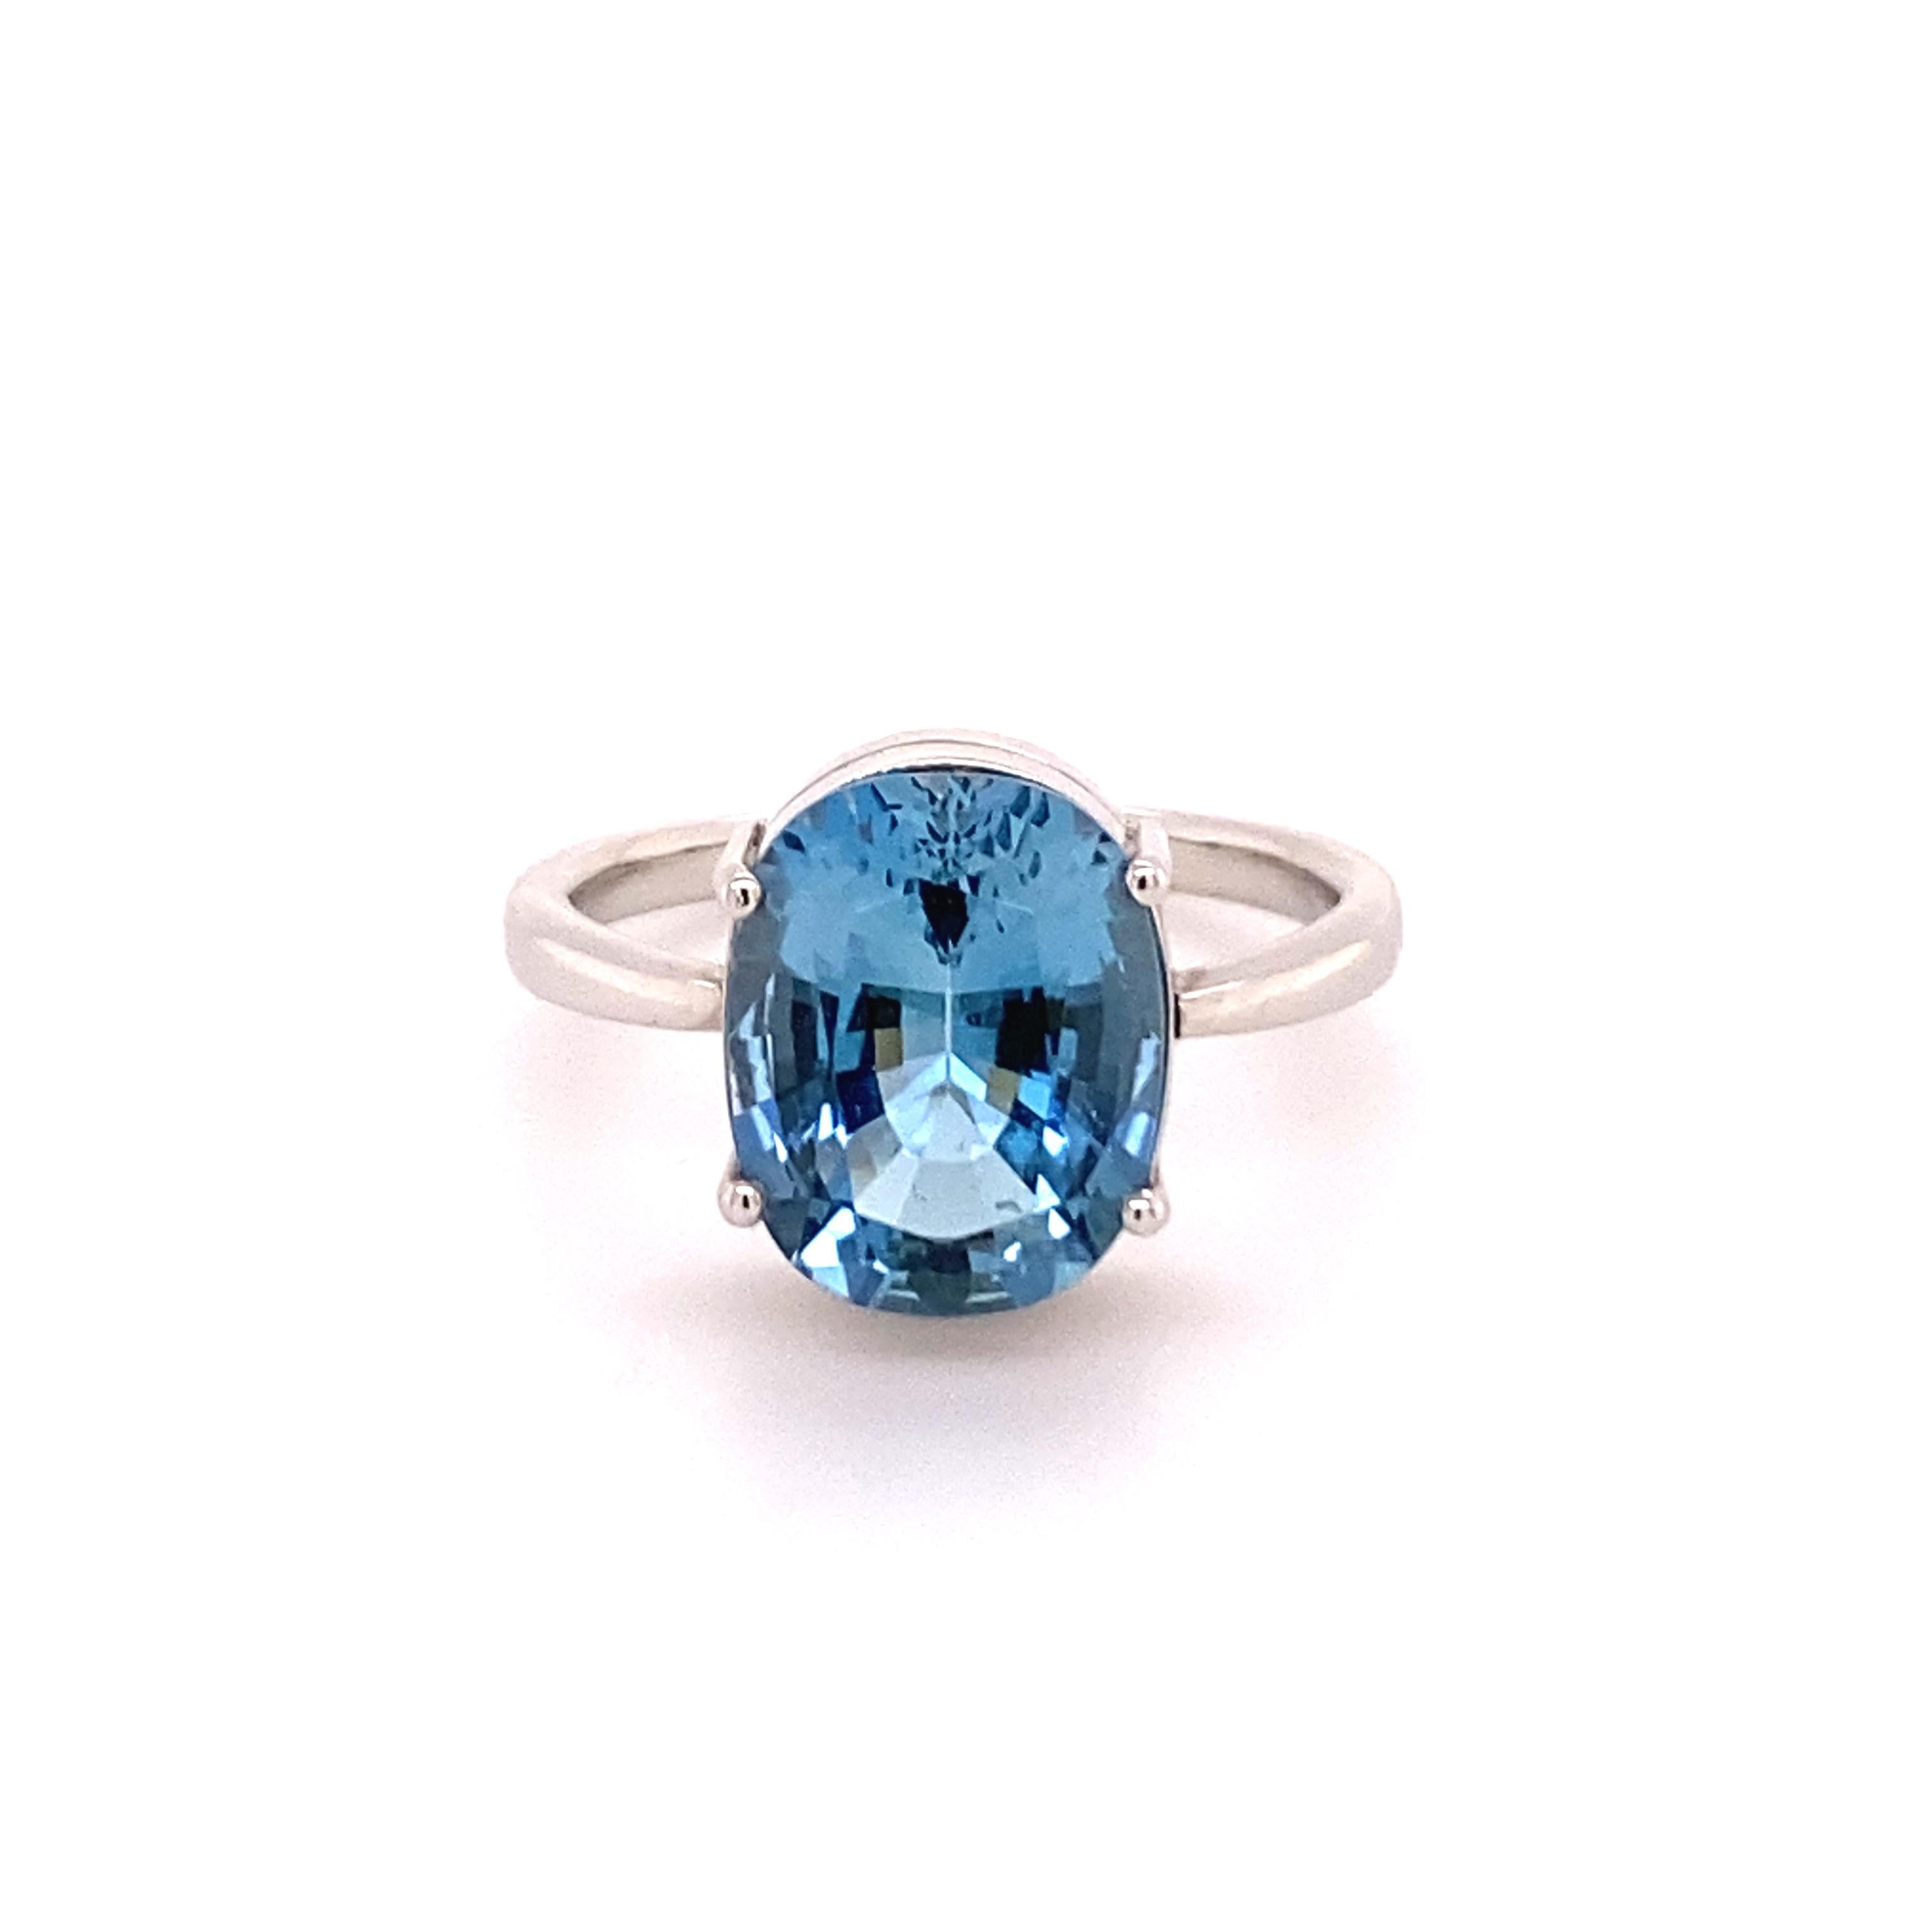 The colour of Aquamarines can vary from a light blue to an intense sea blue, our stone lives up to its name and truly immerses you.
The oval cut stone weighs approximate 6 ct and is set in a solid setting with delicately worked prongs. 
The small